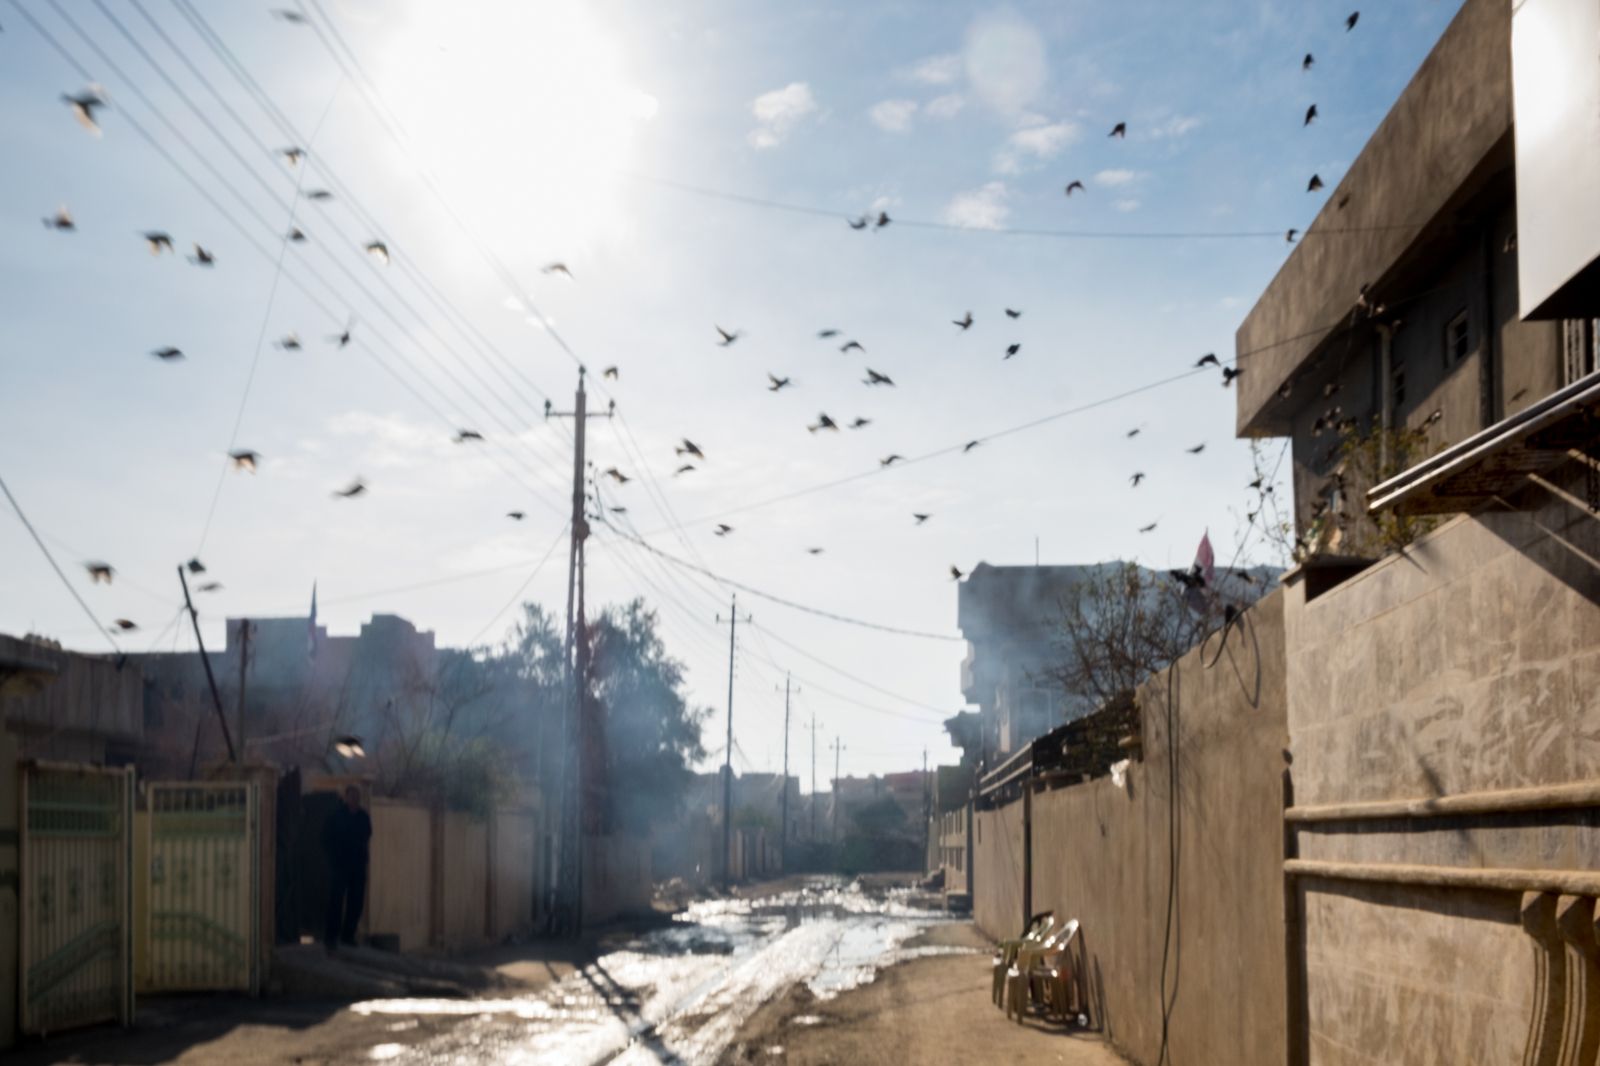 © Cris Veit - Image from the Mosul image makers photography project